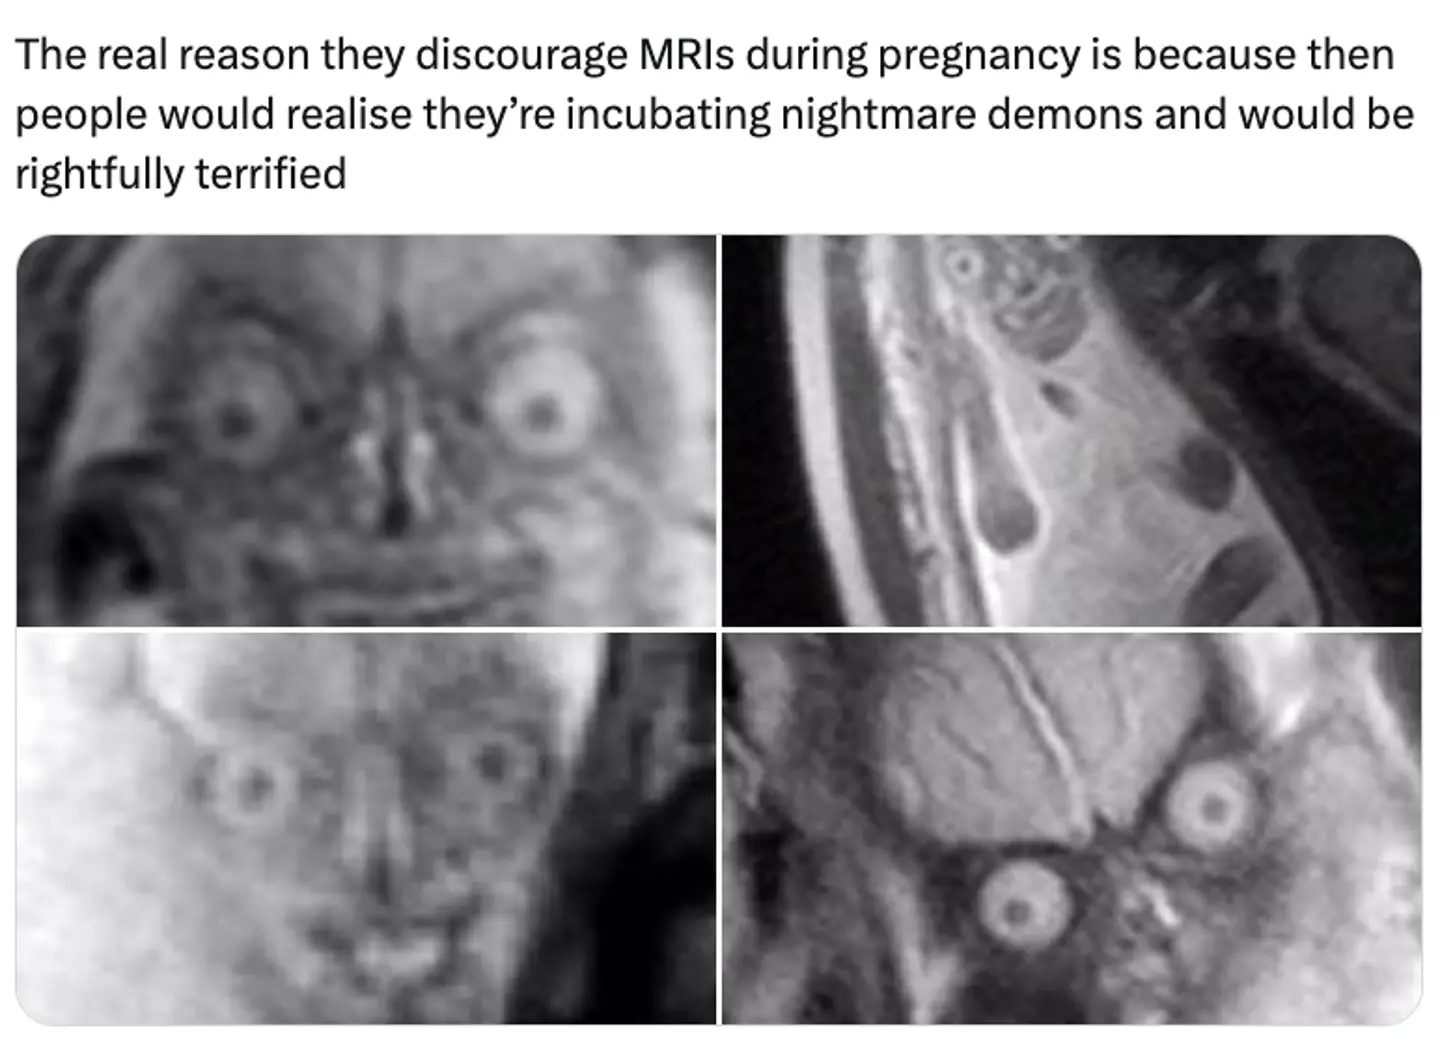 Yep this is how unborn babies look in MRI scans.